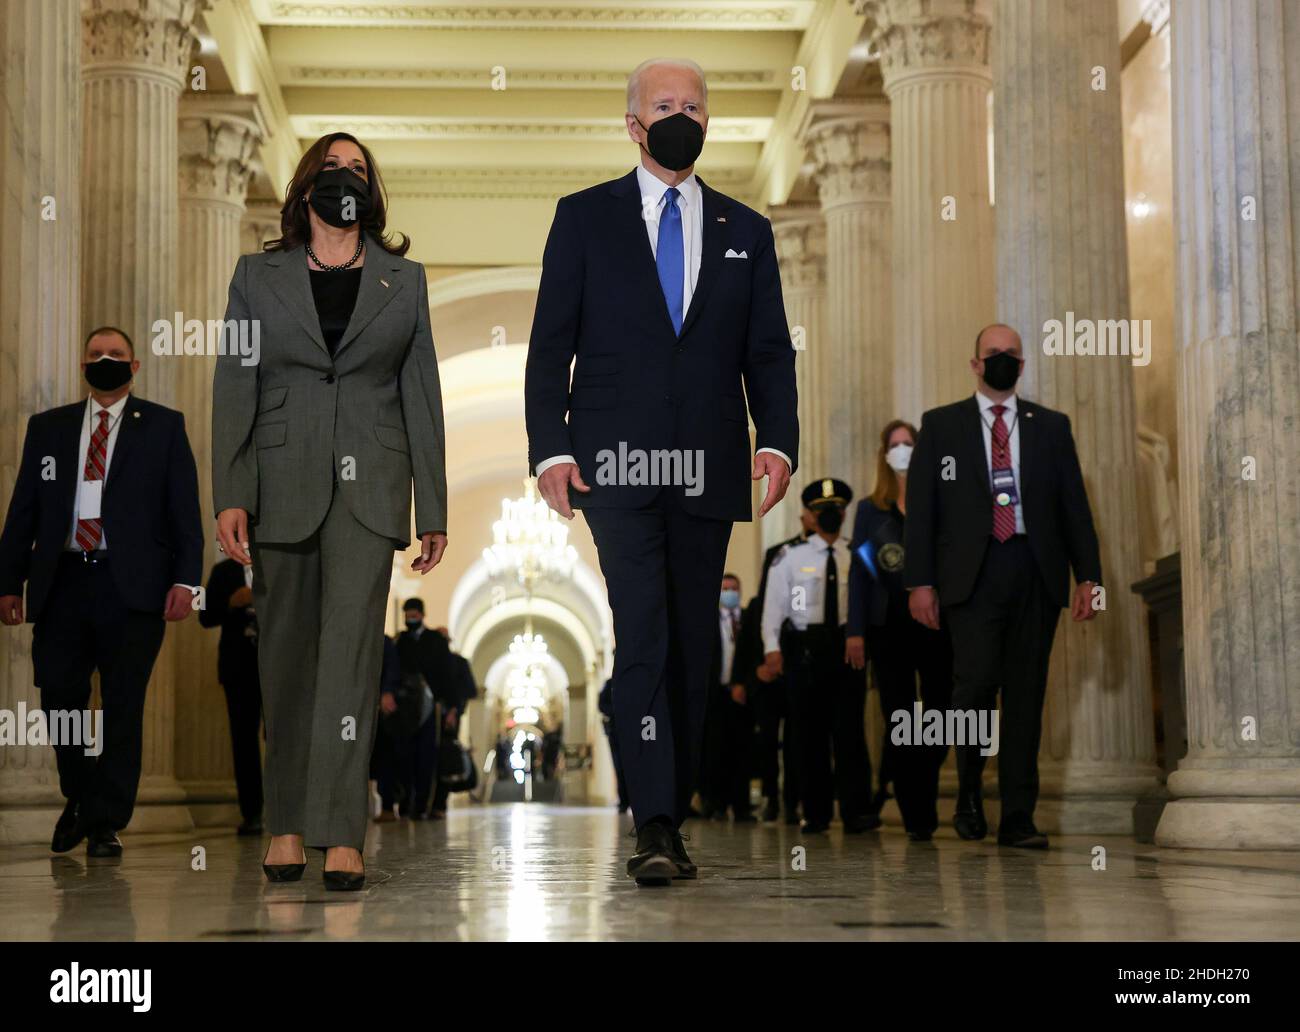 United States President Joe Biden and US Vice President Kamala Harris depart through the Hall of Columns following remarks to mark the first anniversary of the January 6, 2021 attack on the U.S. Capitol by supporters of former President Donald Trump, on Capitol Hill in Washington, U.S., January 6, 2022. Credit: Evelyn Hockstein/Pool via CNP /MediaPunch Stock Photo